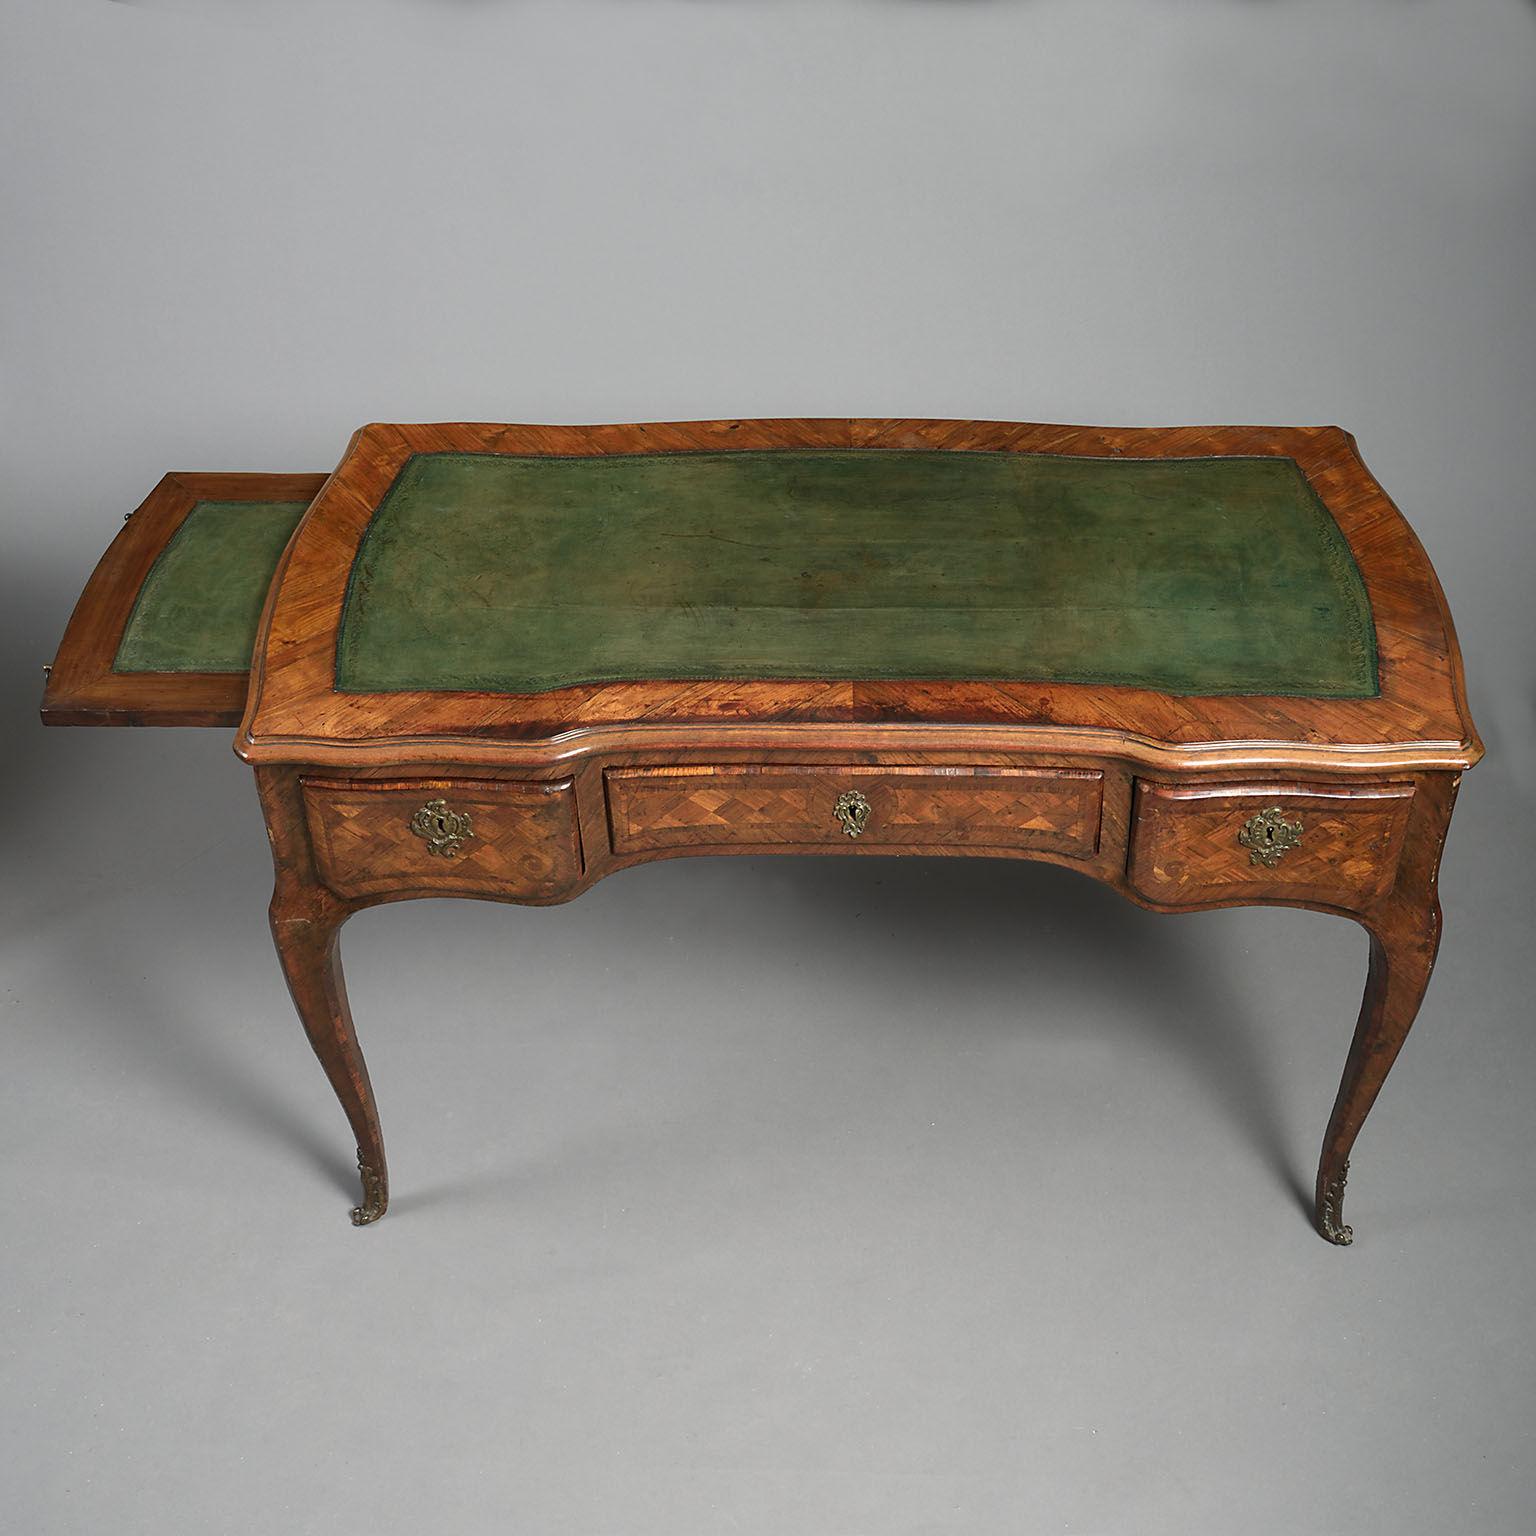 The shaped, moulded rectangular top inset with a green tooled leather writing surface above a long frieze drawer, flanked by two short shaped drawers and with slides to each end inset with green tooled leather on cabriole legs and gilt metal sabots.